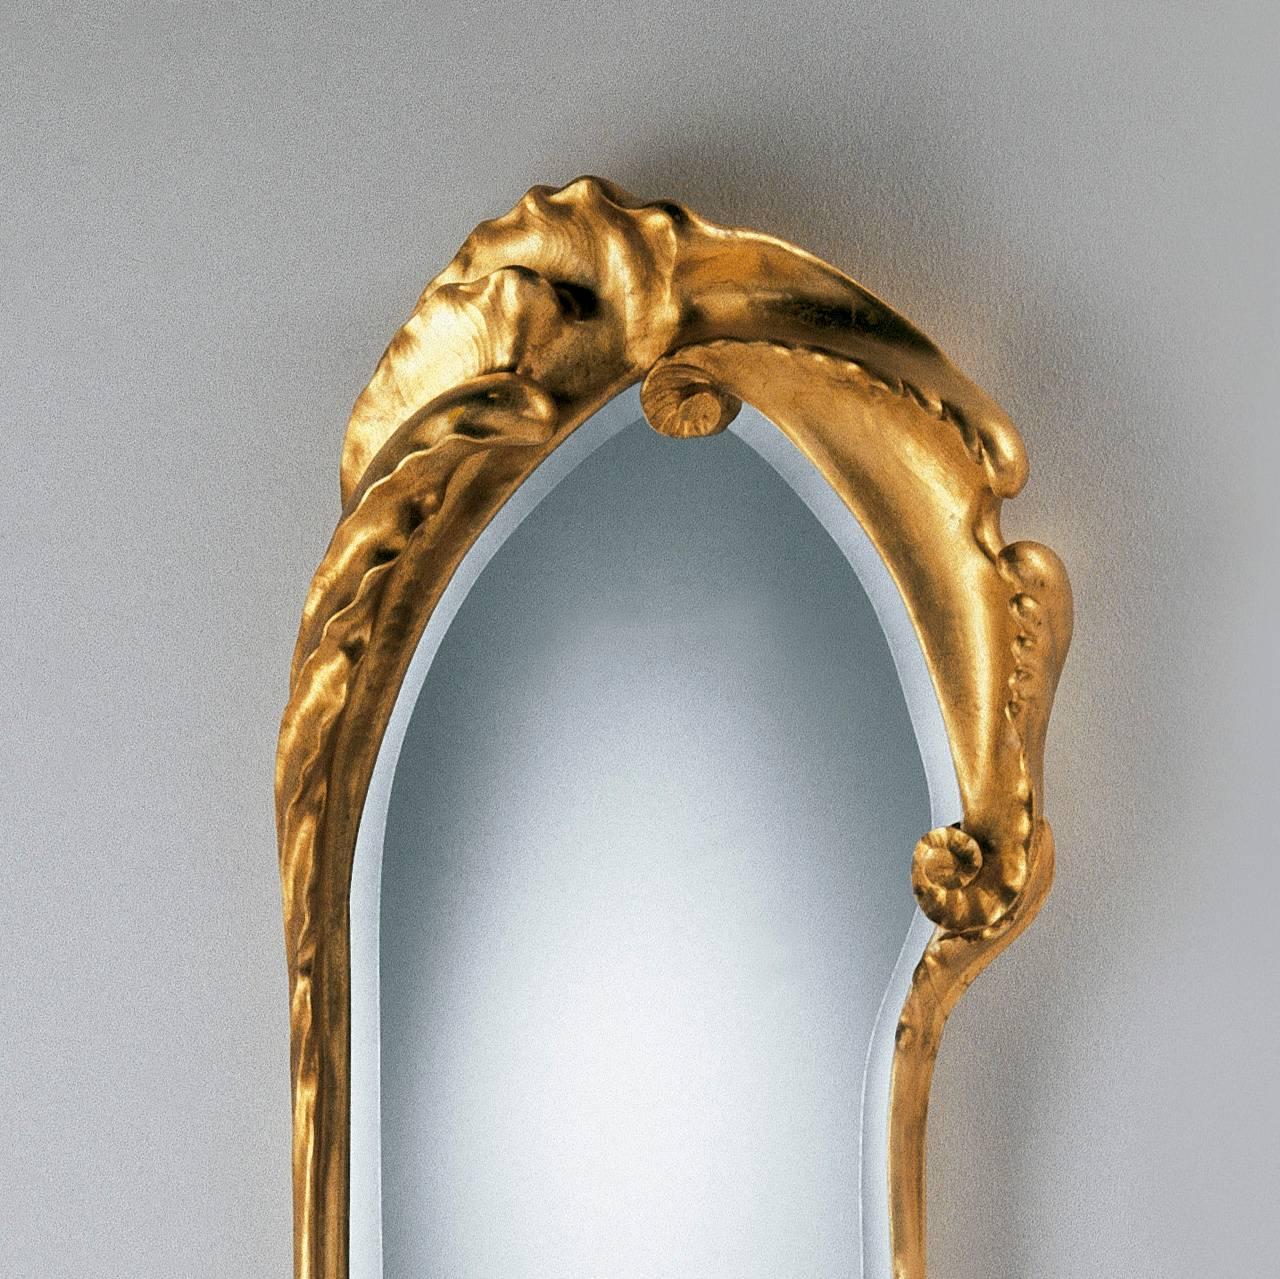 Mirror designed by Antoni Gaudi, circa 1902 and manufactured by BD furniture in Barcelona.

Solid oak: varnished or covered in fine gold leaf.

58cm x 195cm

Year: 1902

Antoni Gaudí (1852/1926) is, without doubt, the most internationally